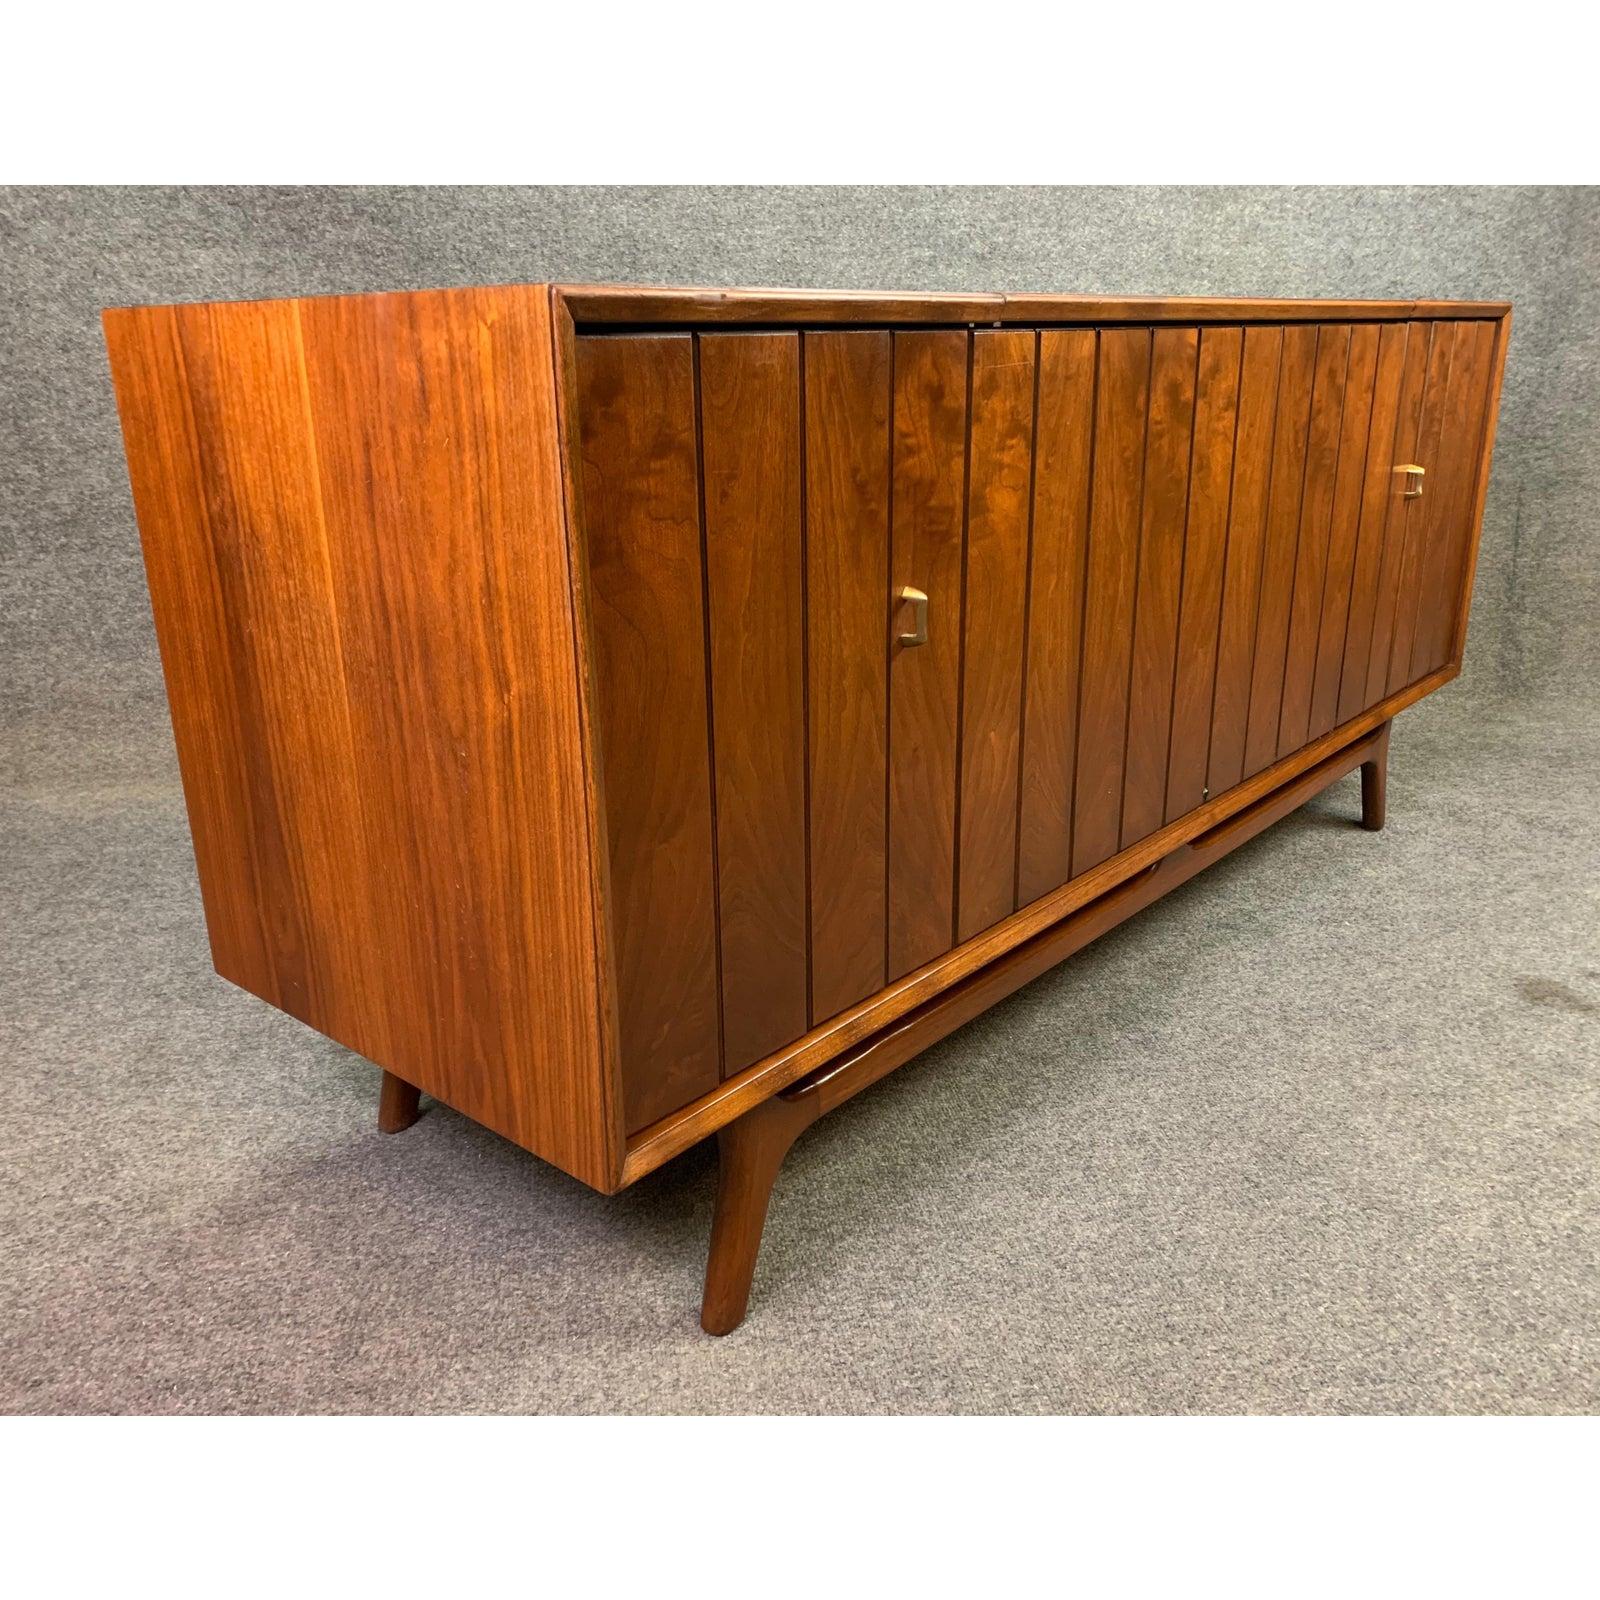 zenith console stereo